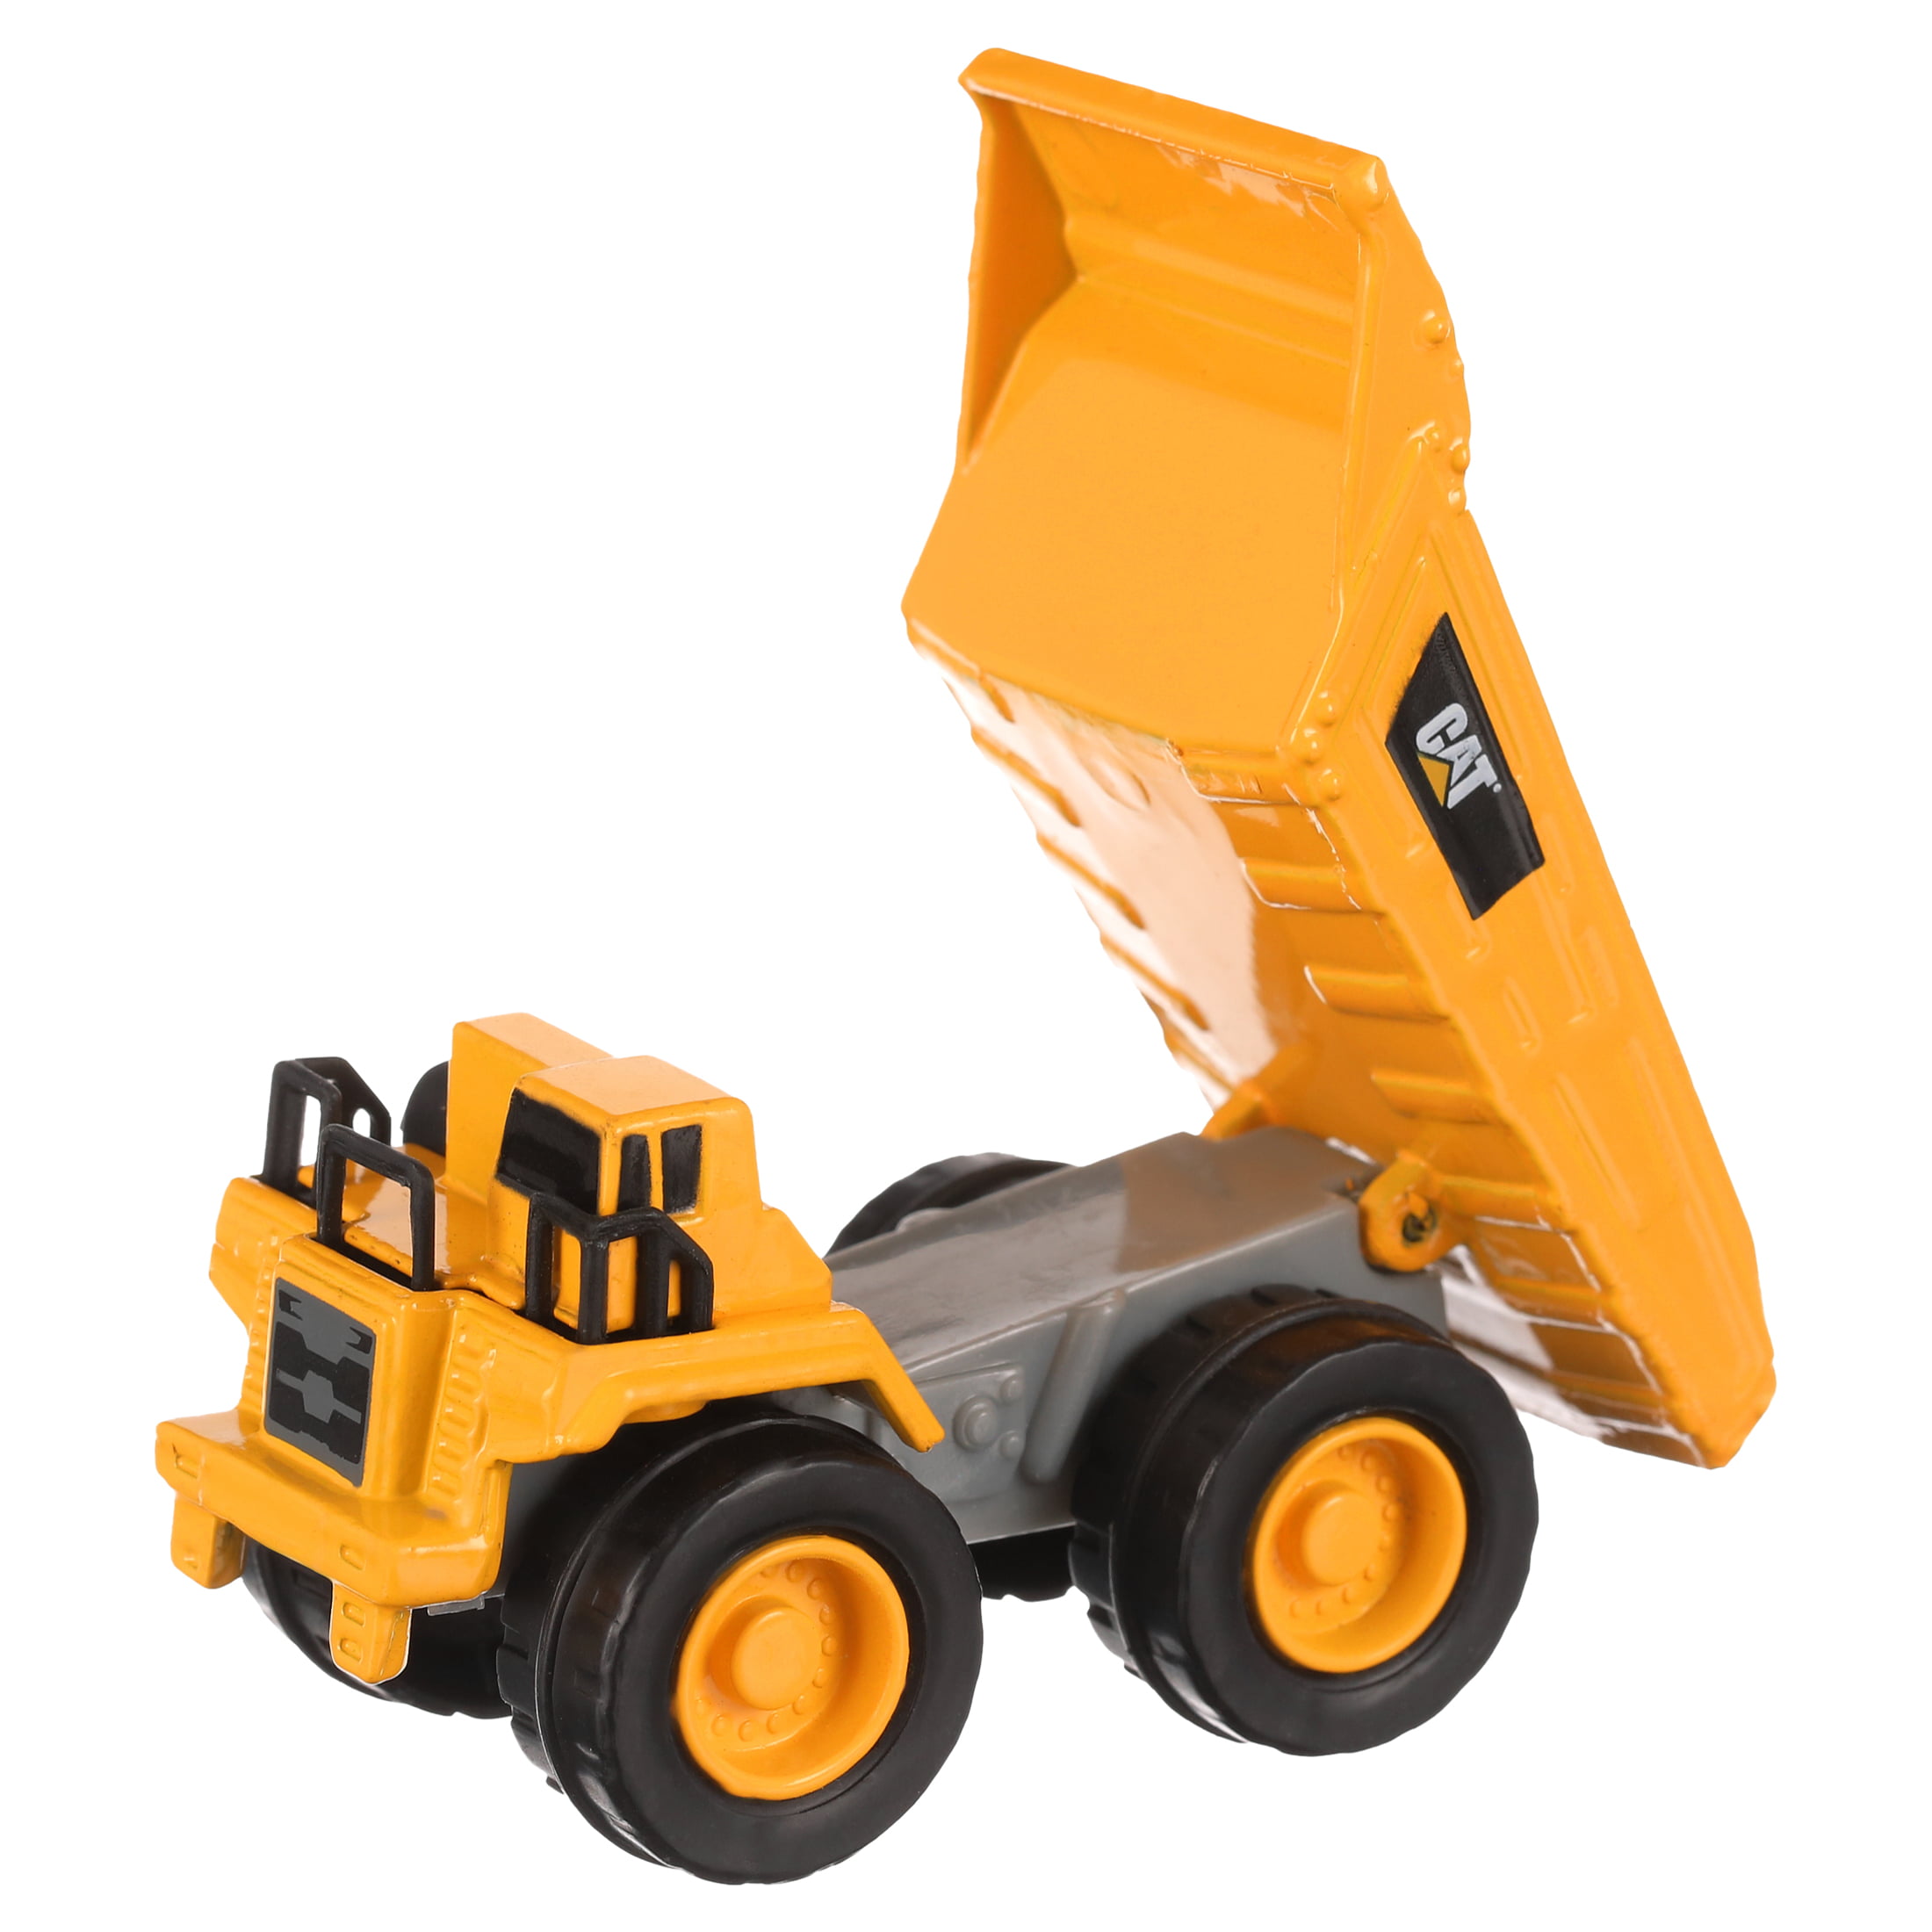 CAT Die Cast Toy Includes Cement Mixer, Dump Truck and Road Grader  Construction Vehicle Playset (3 Pieces)